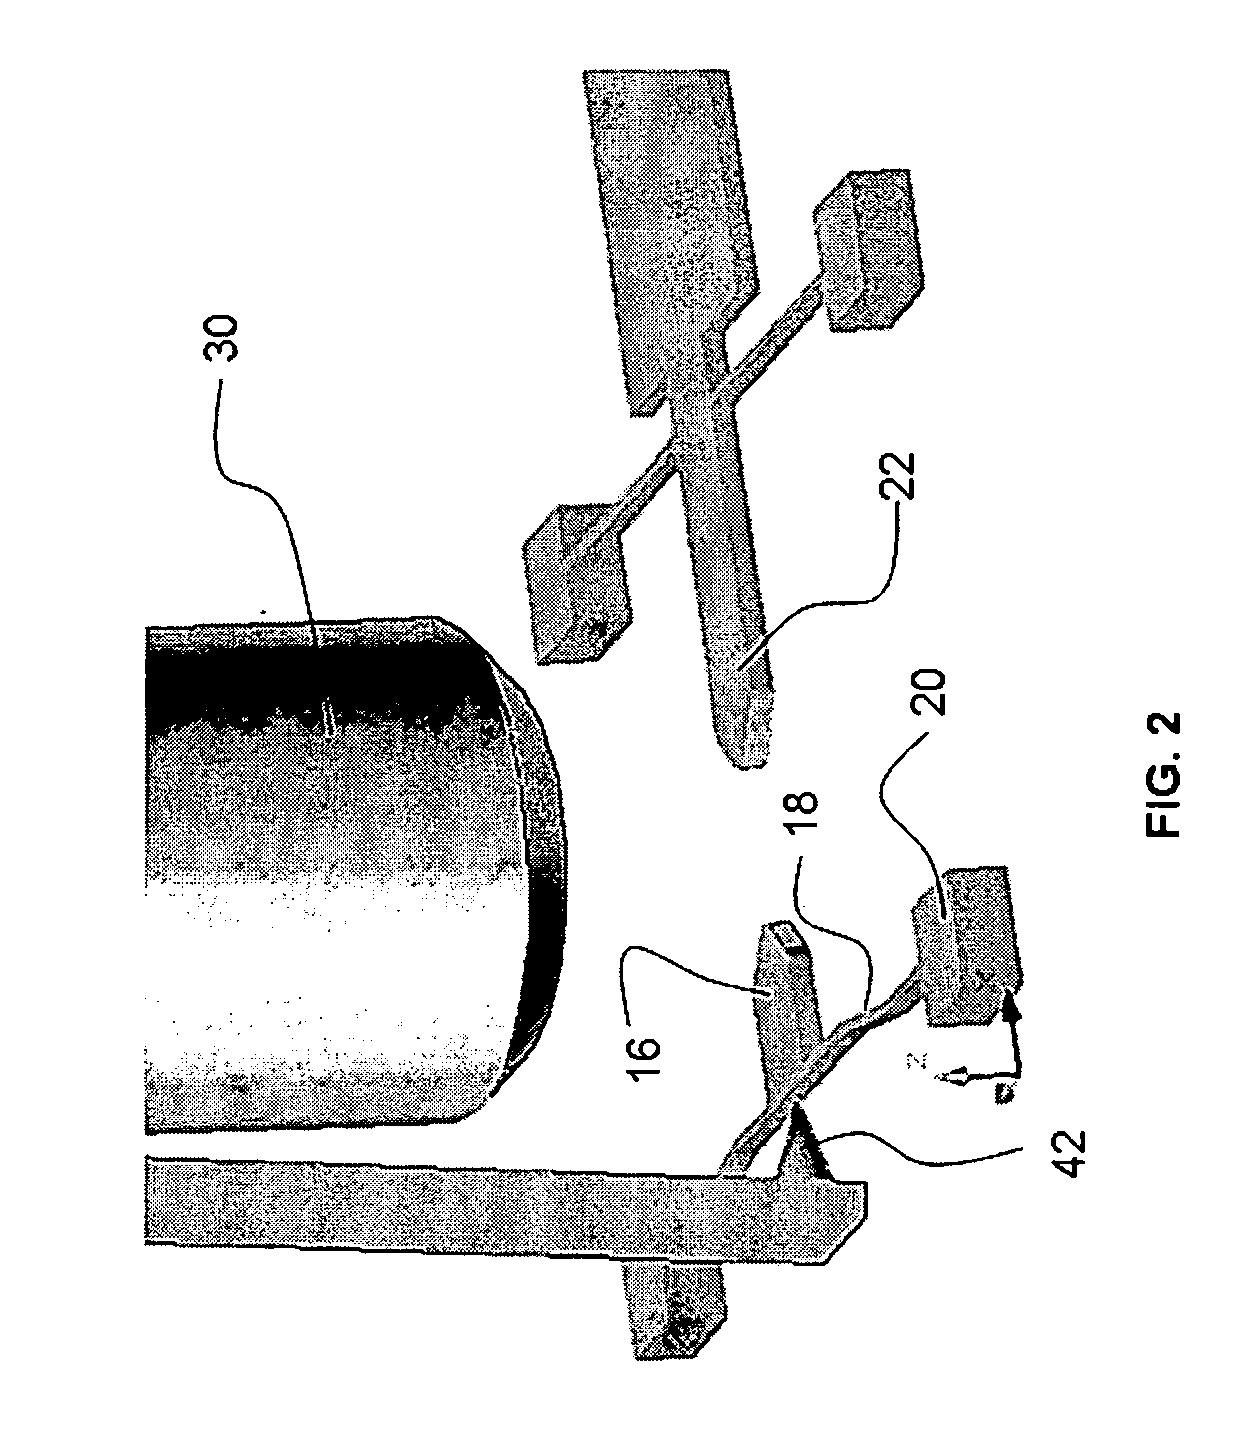 Stress micro mechanical test cell, device, system and methods